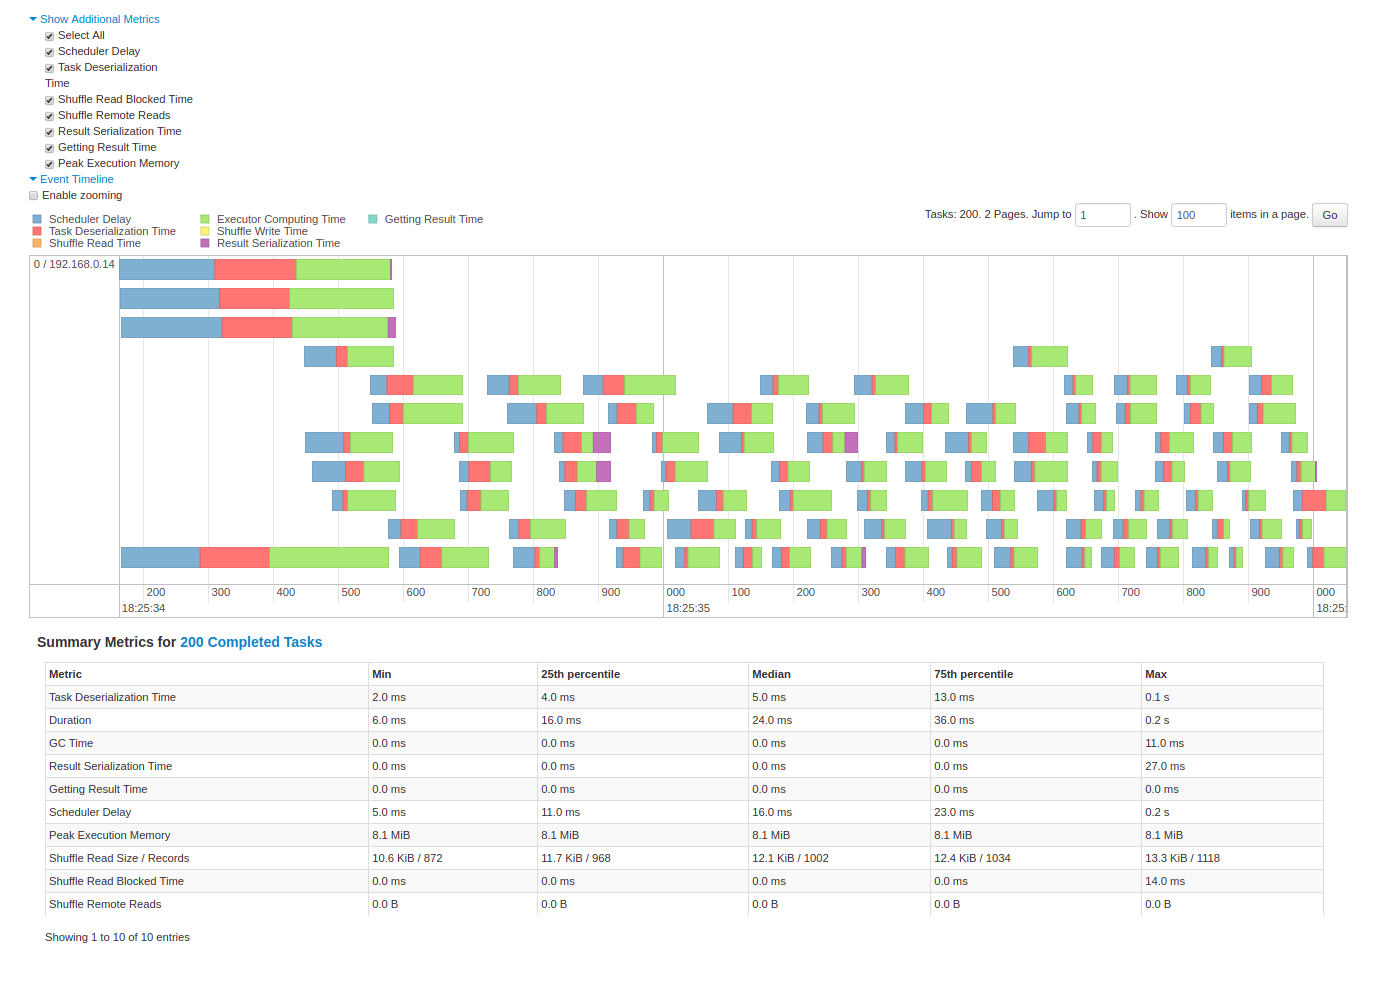 Screenshot of Apache Spark jobs and summary metrics for all tasks are represented in a table and in a timeline.